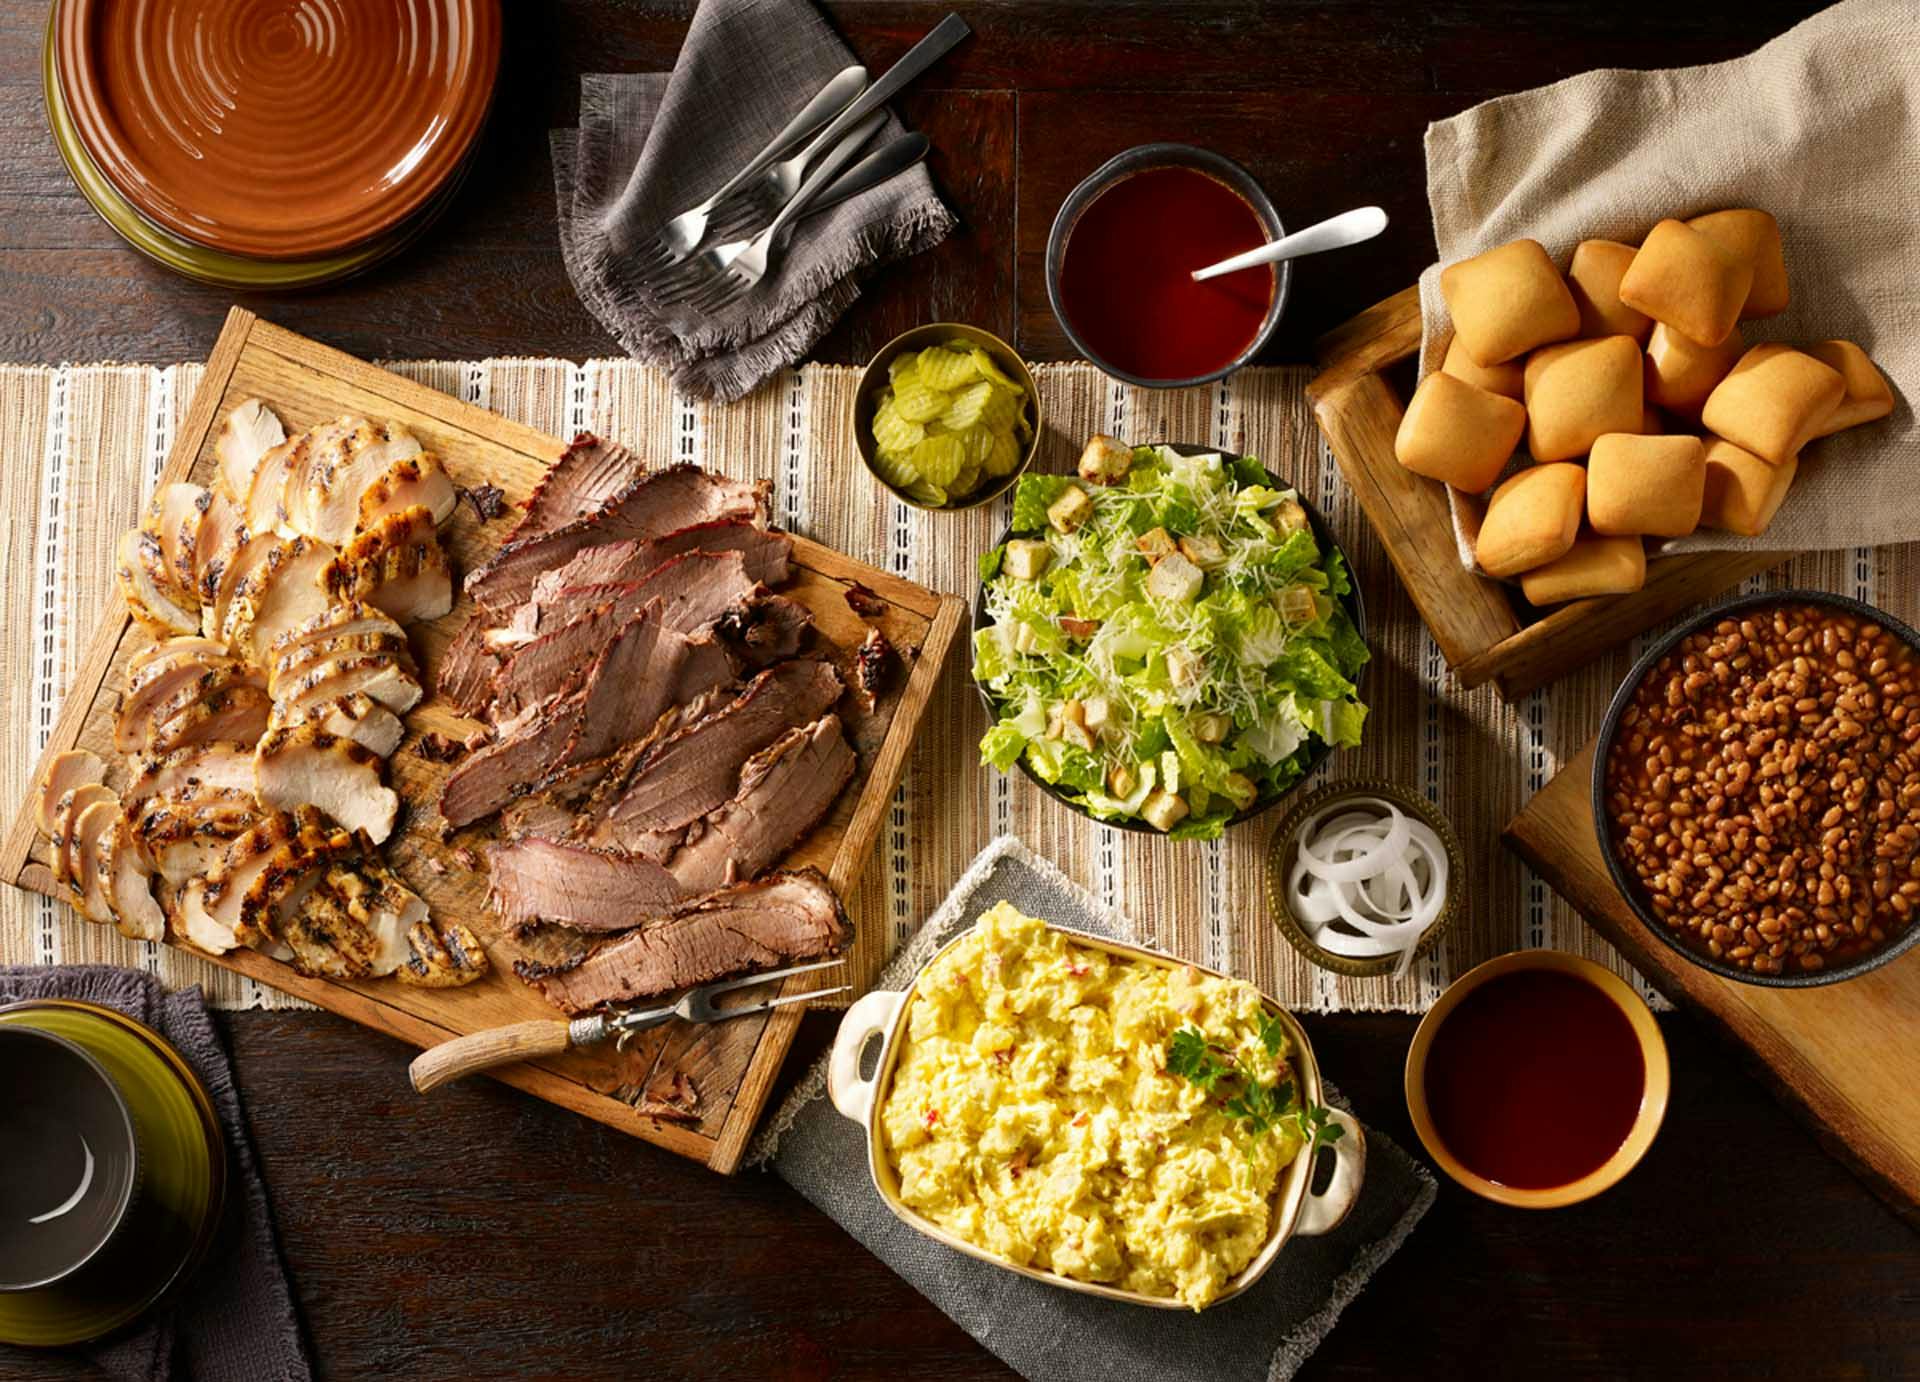 Franchising.com: Former Pilot Plans to Bring Dickey’s Barbecue Pit to Snohomish, WA